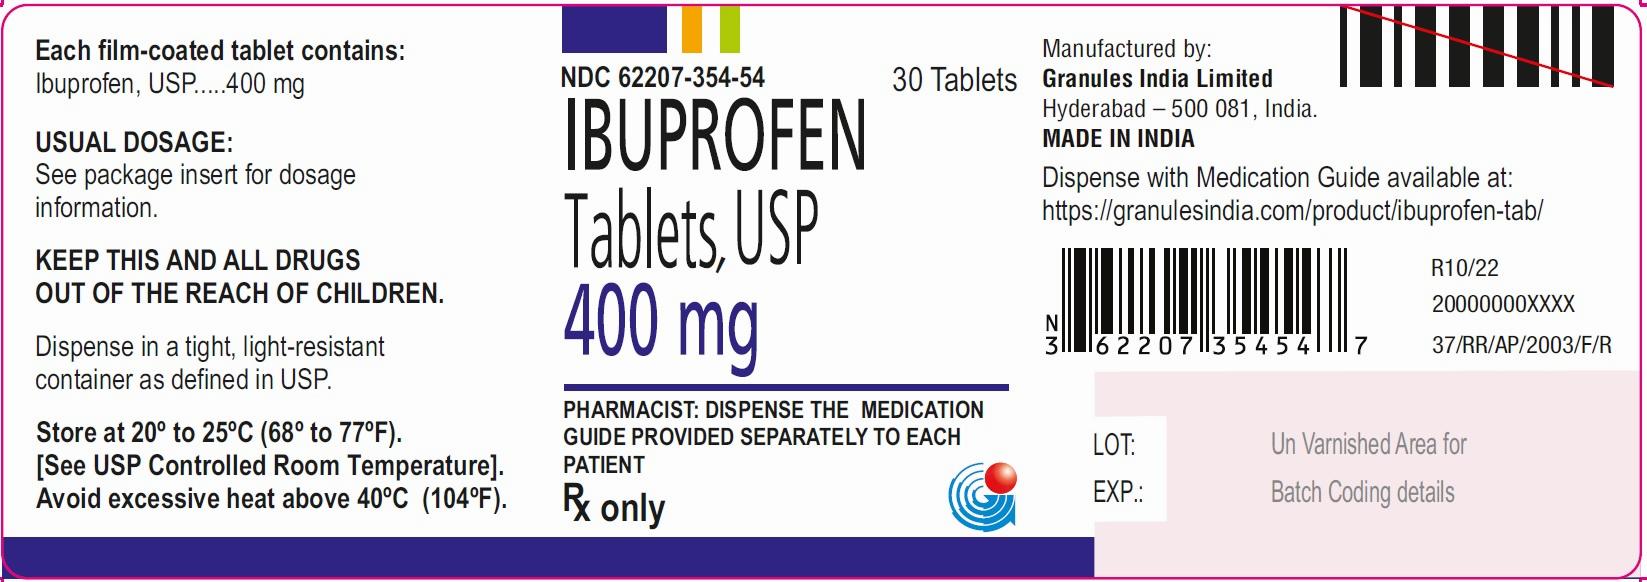 A box of 30 tablets of 400mg ibuprofen, manufactured by Granules India Limited in Hyderabad, India